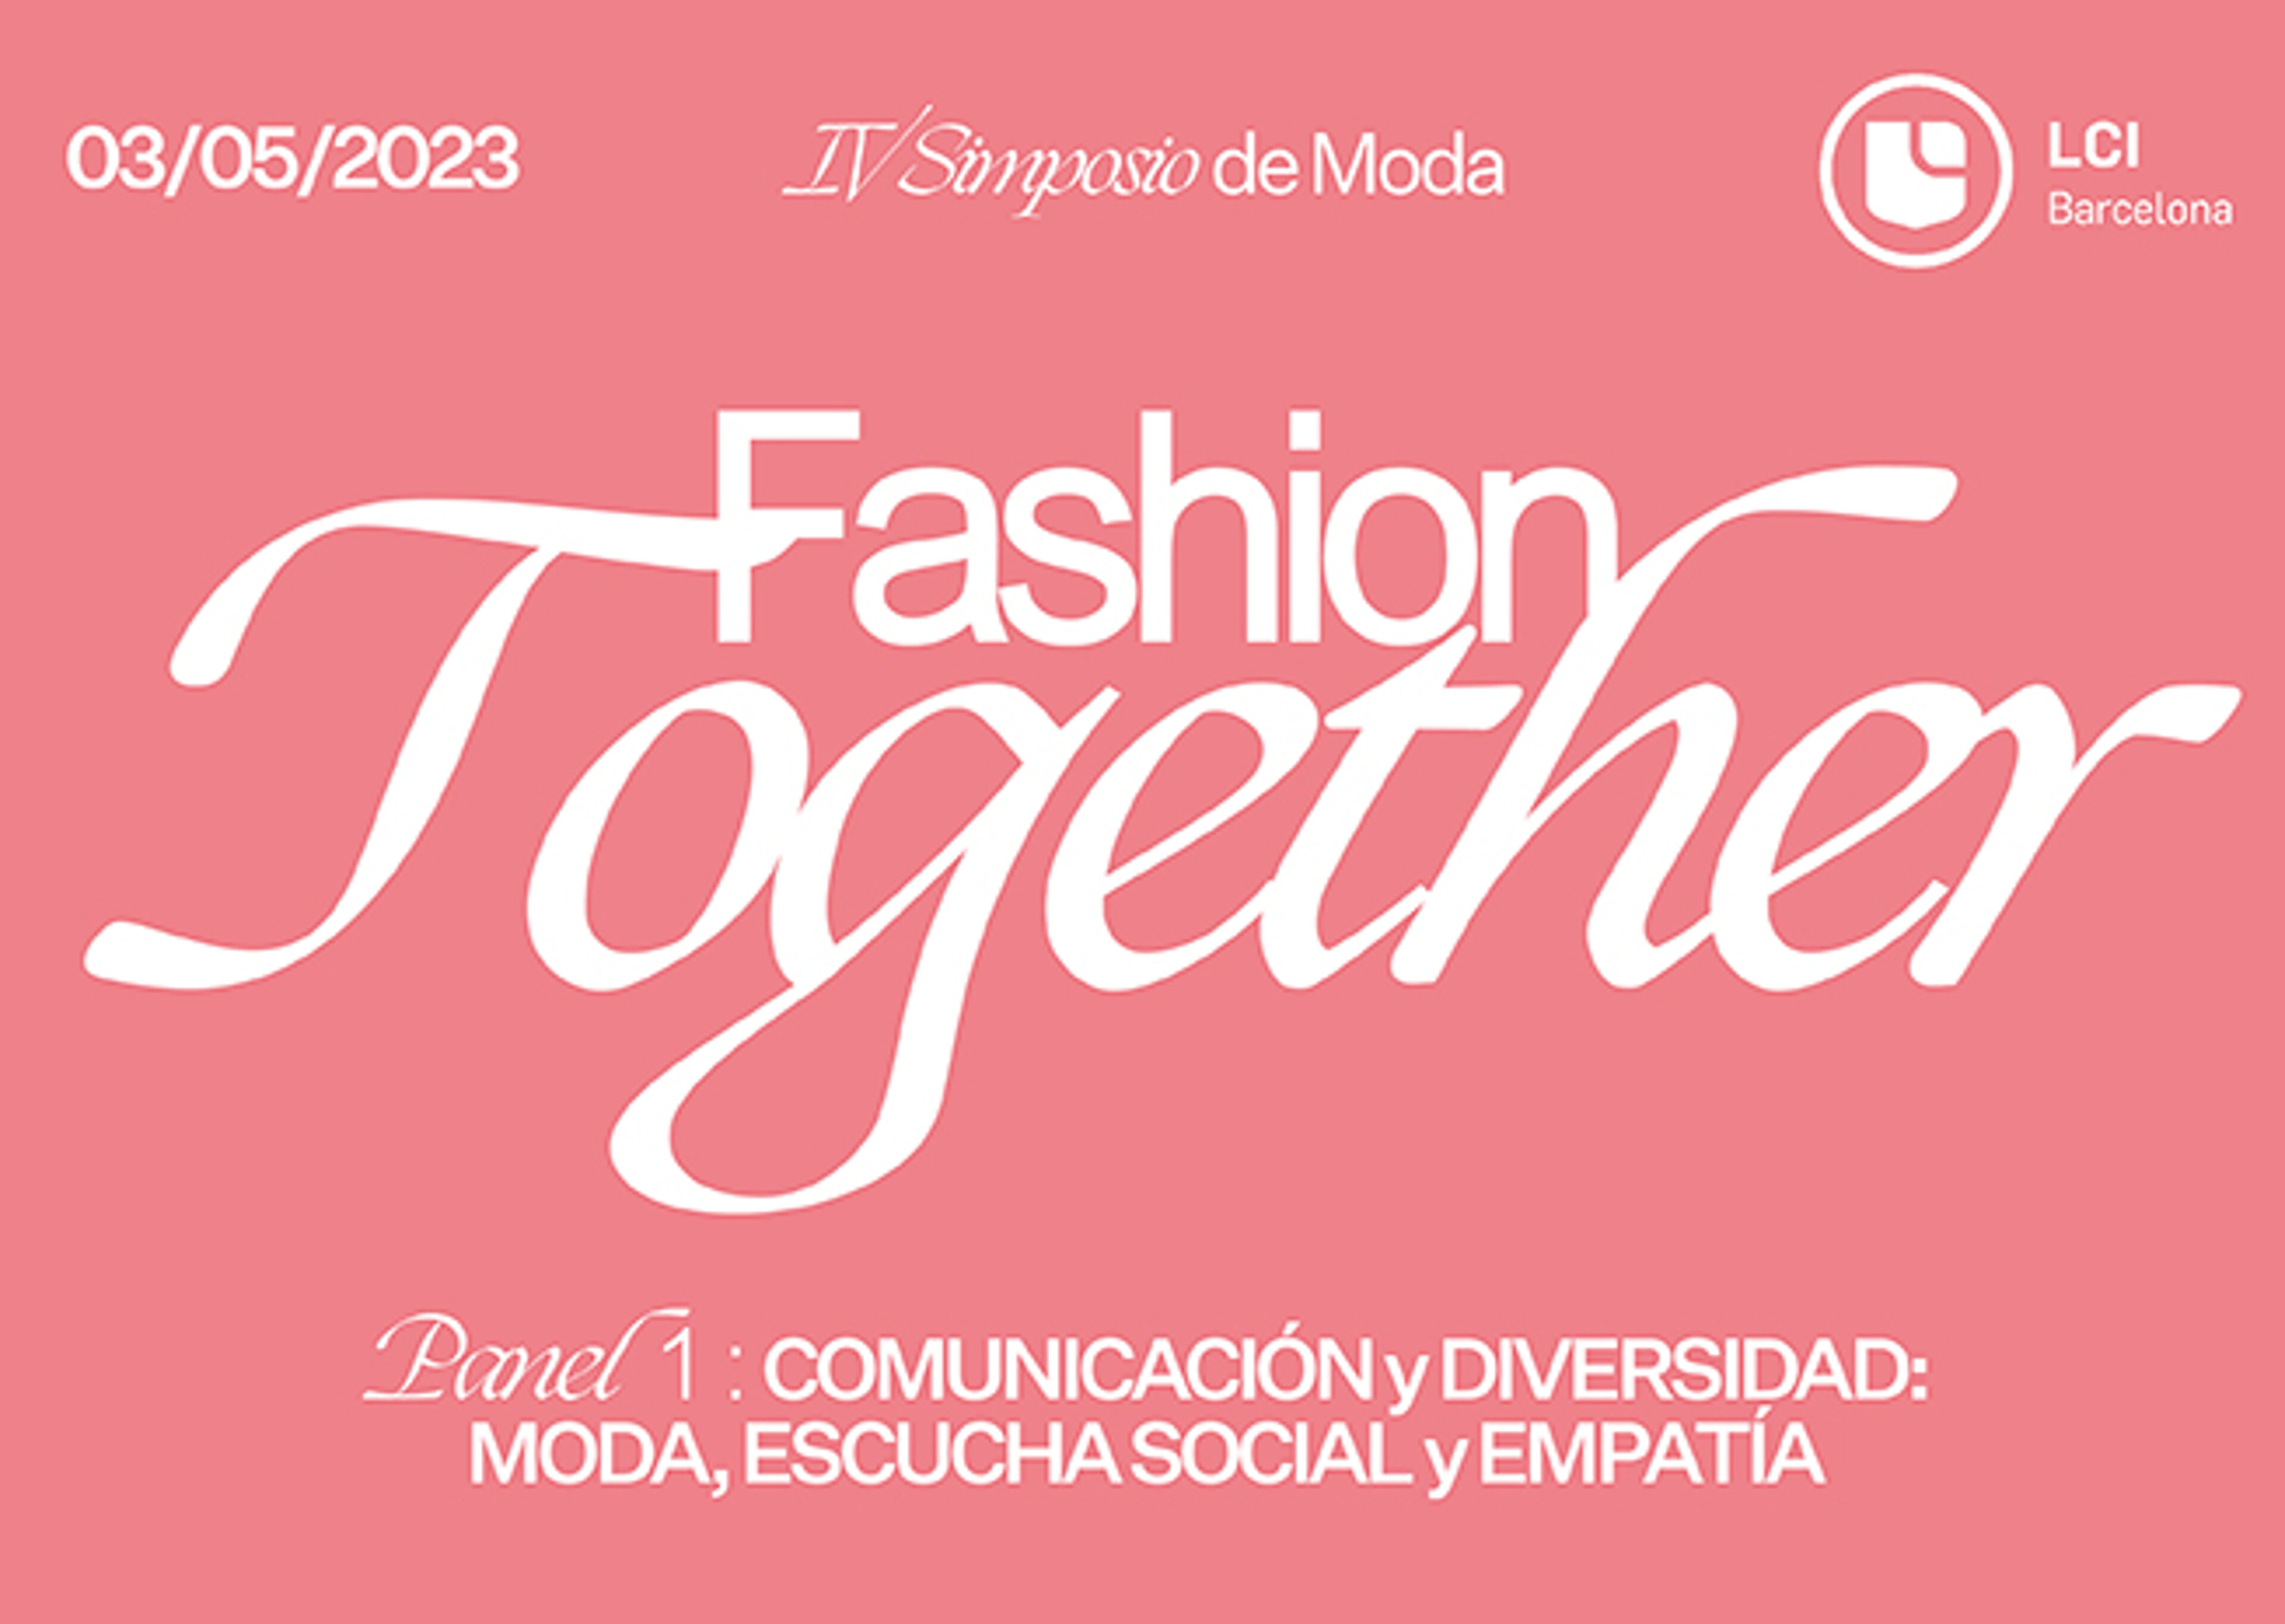 Promotional poster for 'Fashion Together', a fashion symposium held on May 3, 2023, focusing on communication and diversity in fashion, social listening, and empathy.